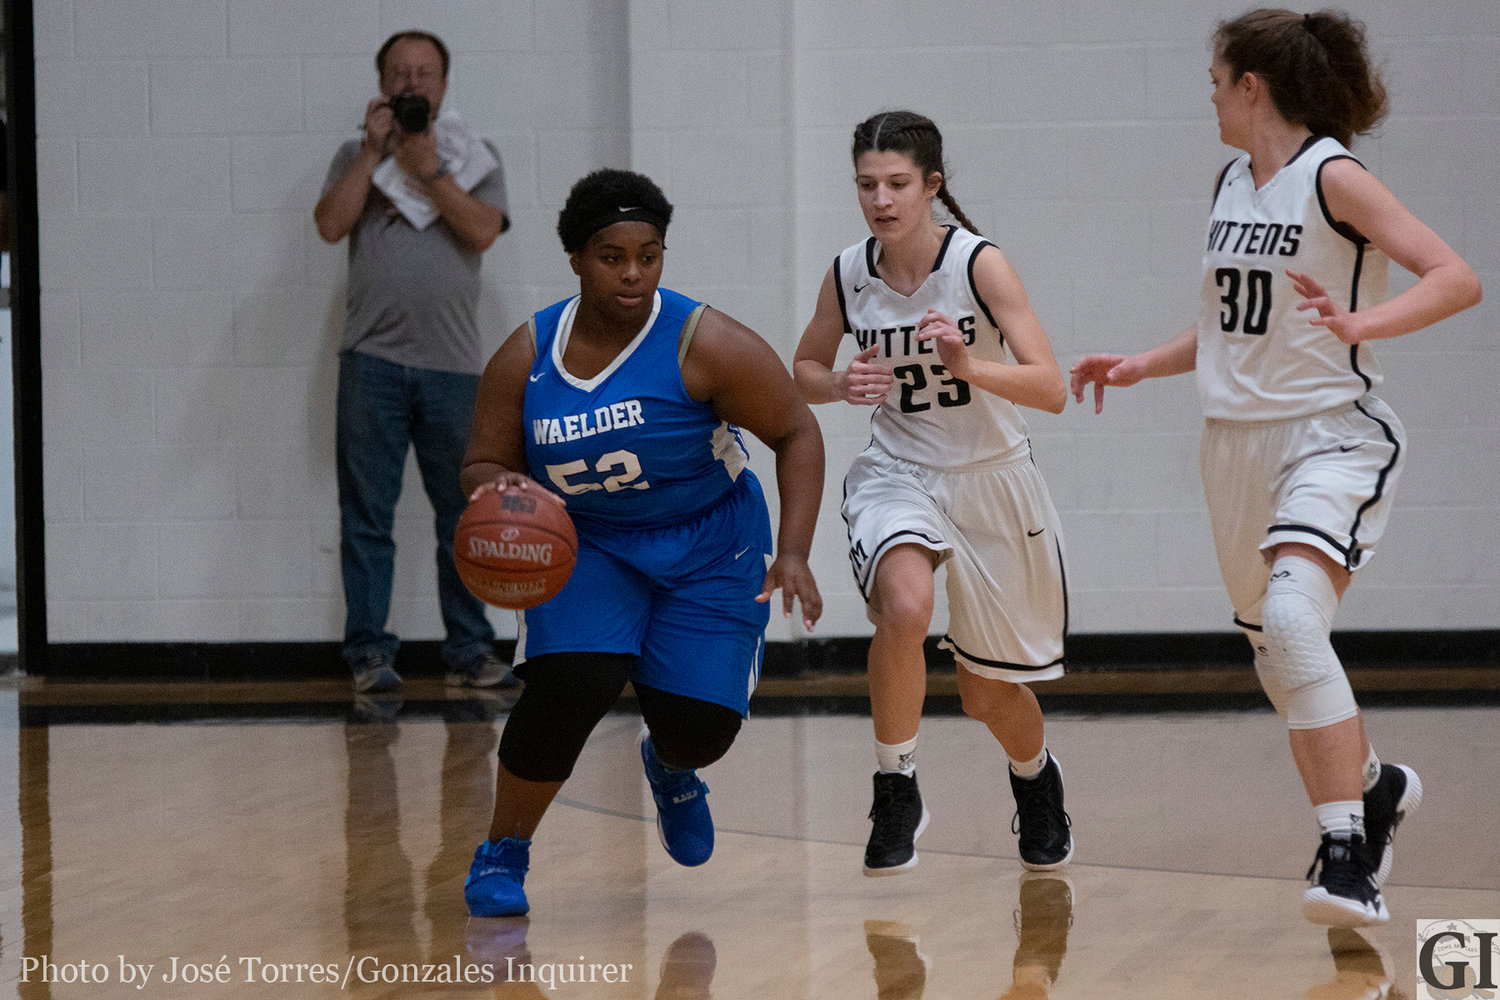 Brejhai Montgomery (52) had a team-leading seven points before exiting the game early in the fourth quarter with an apparent leg injury. Waelder lost 71-15 to the Moulton Kittens who are currently ranked fourth in Class 1A girls basketball.